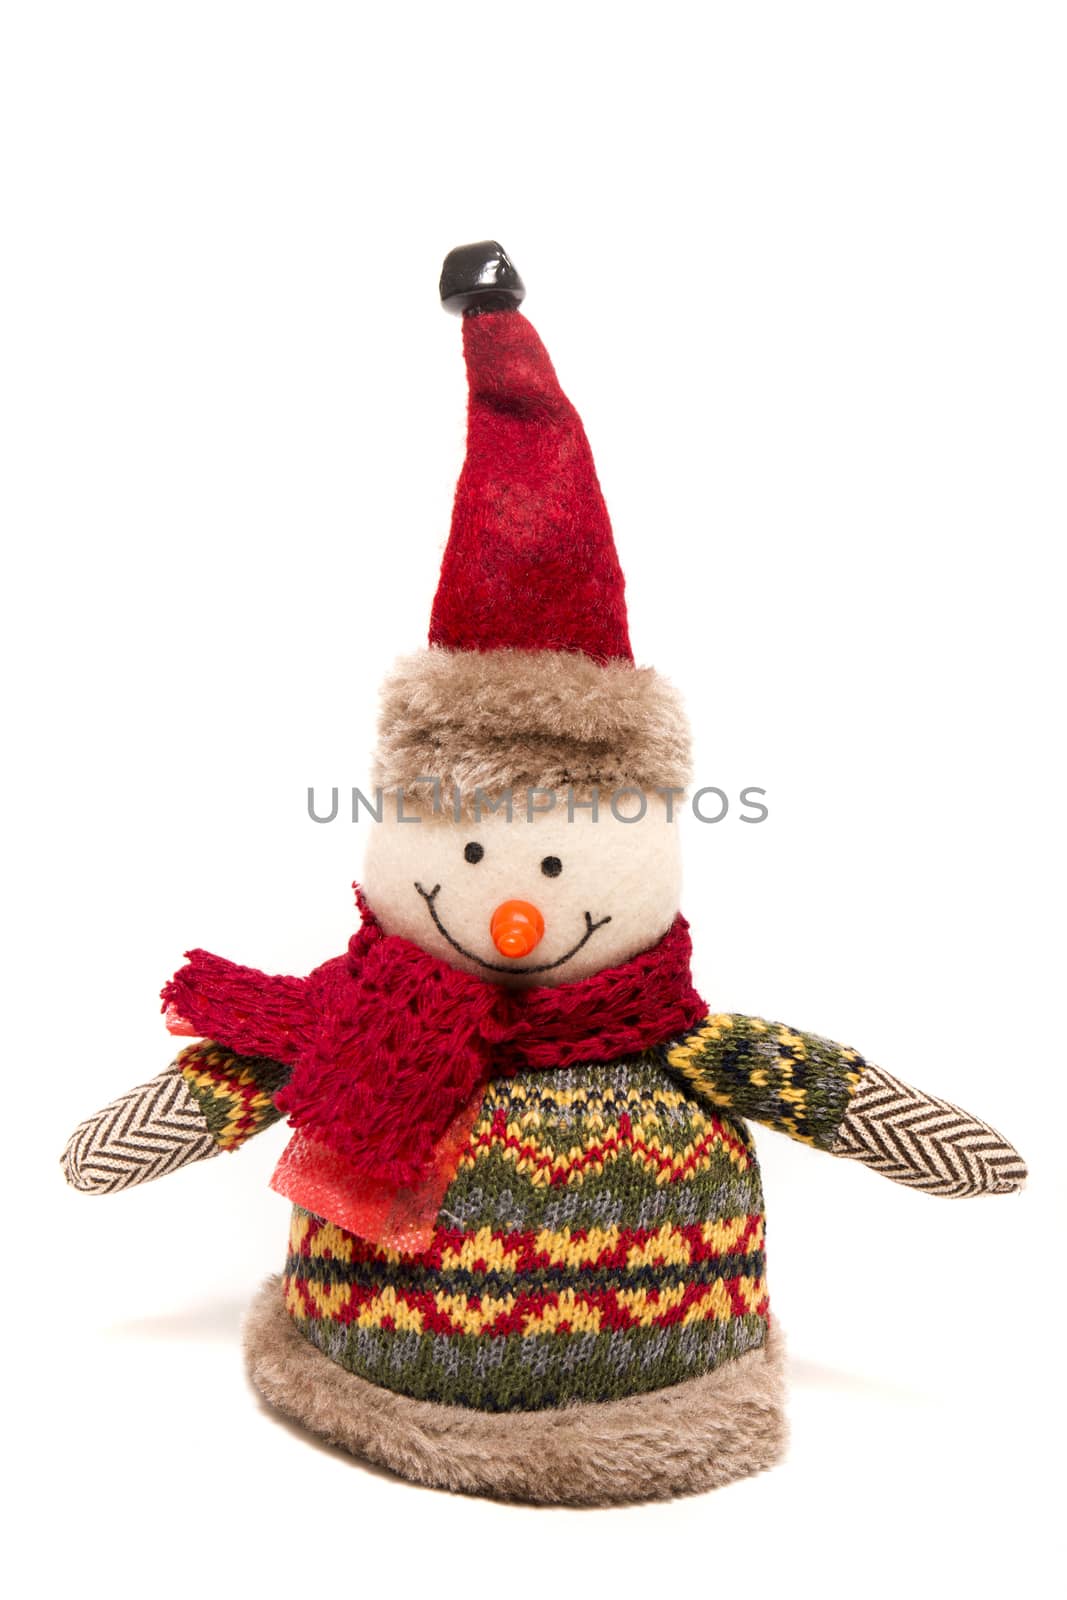 Stuffed Snowman toy isolated on a white background.